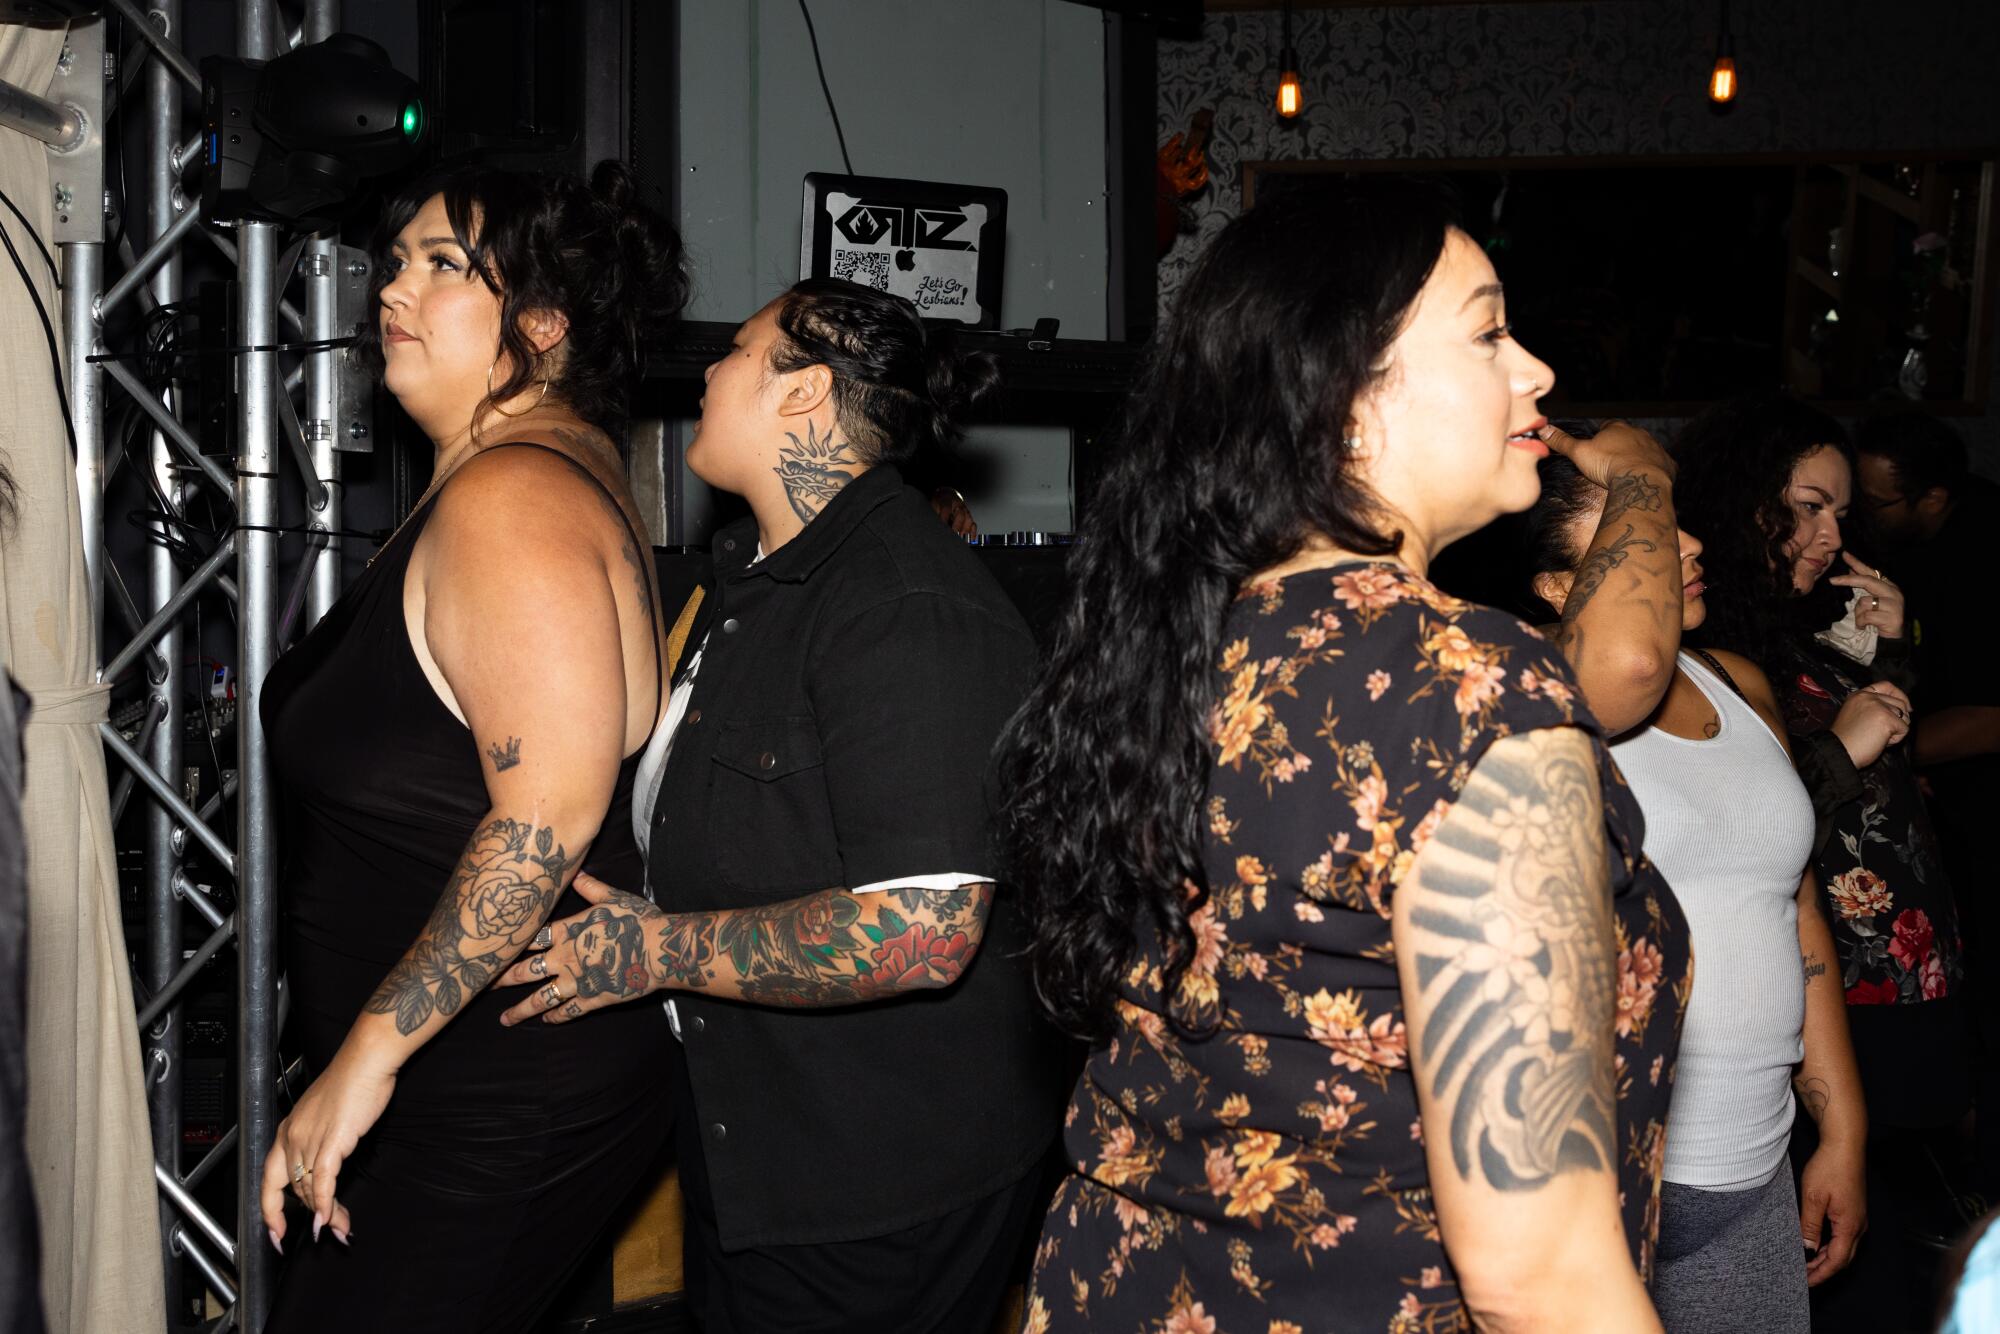 Guests take to the dance floor as reggaeton blasts throughout Mi Corazon during Toxica Fridays